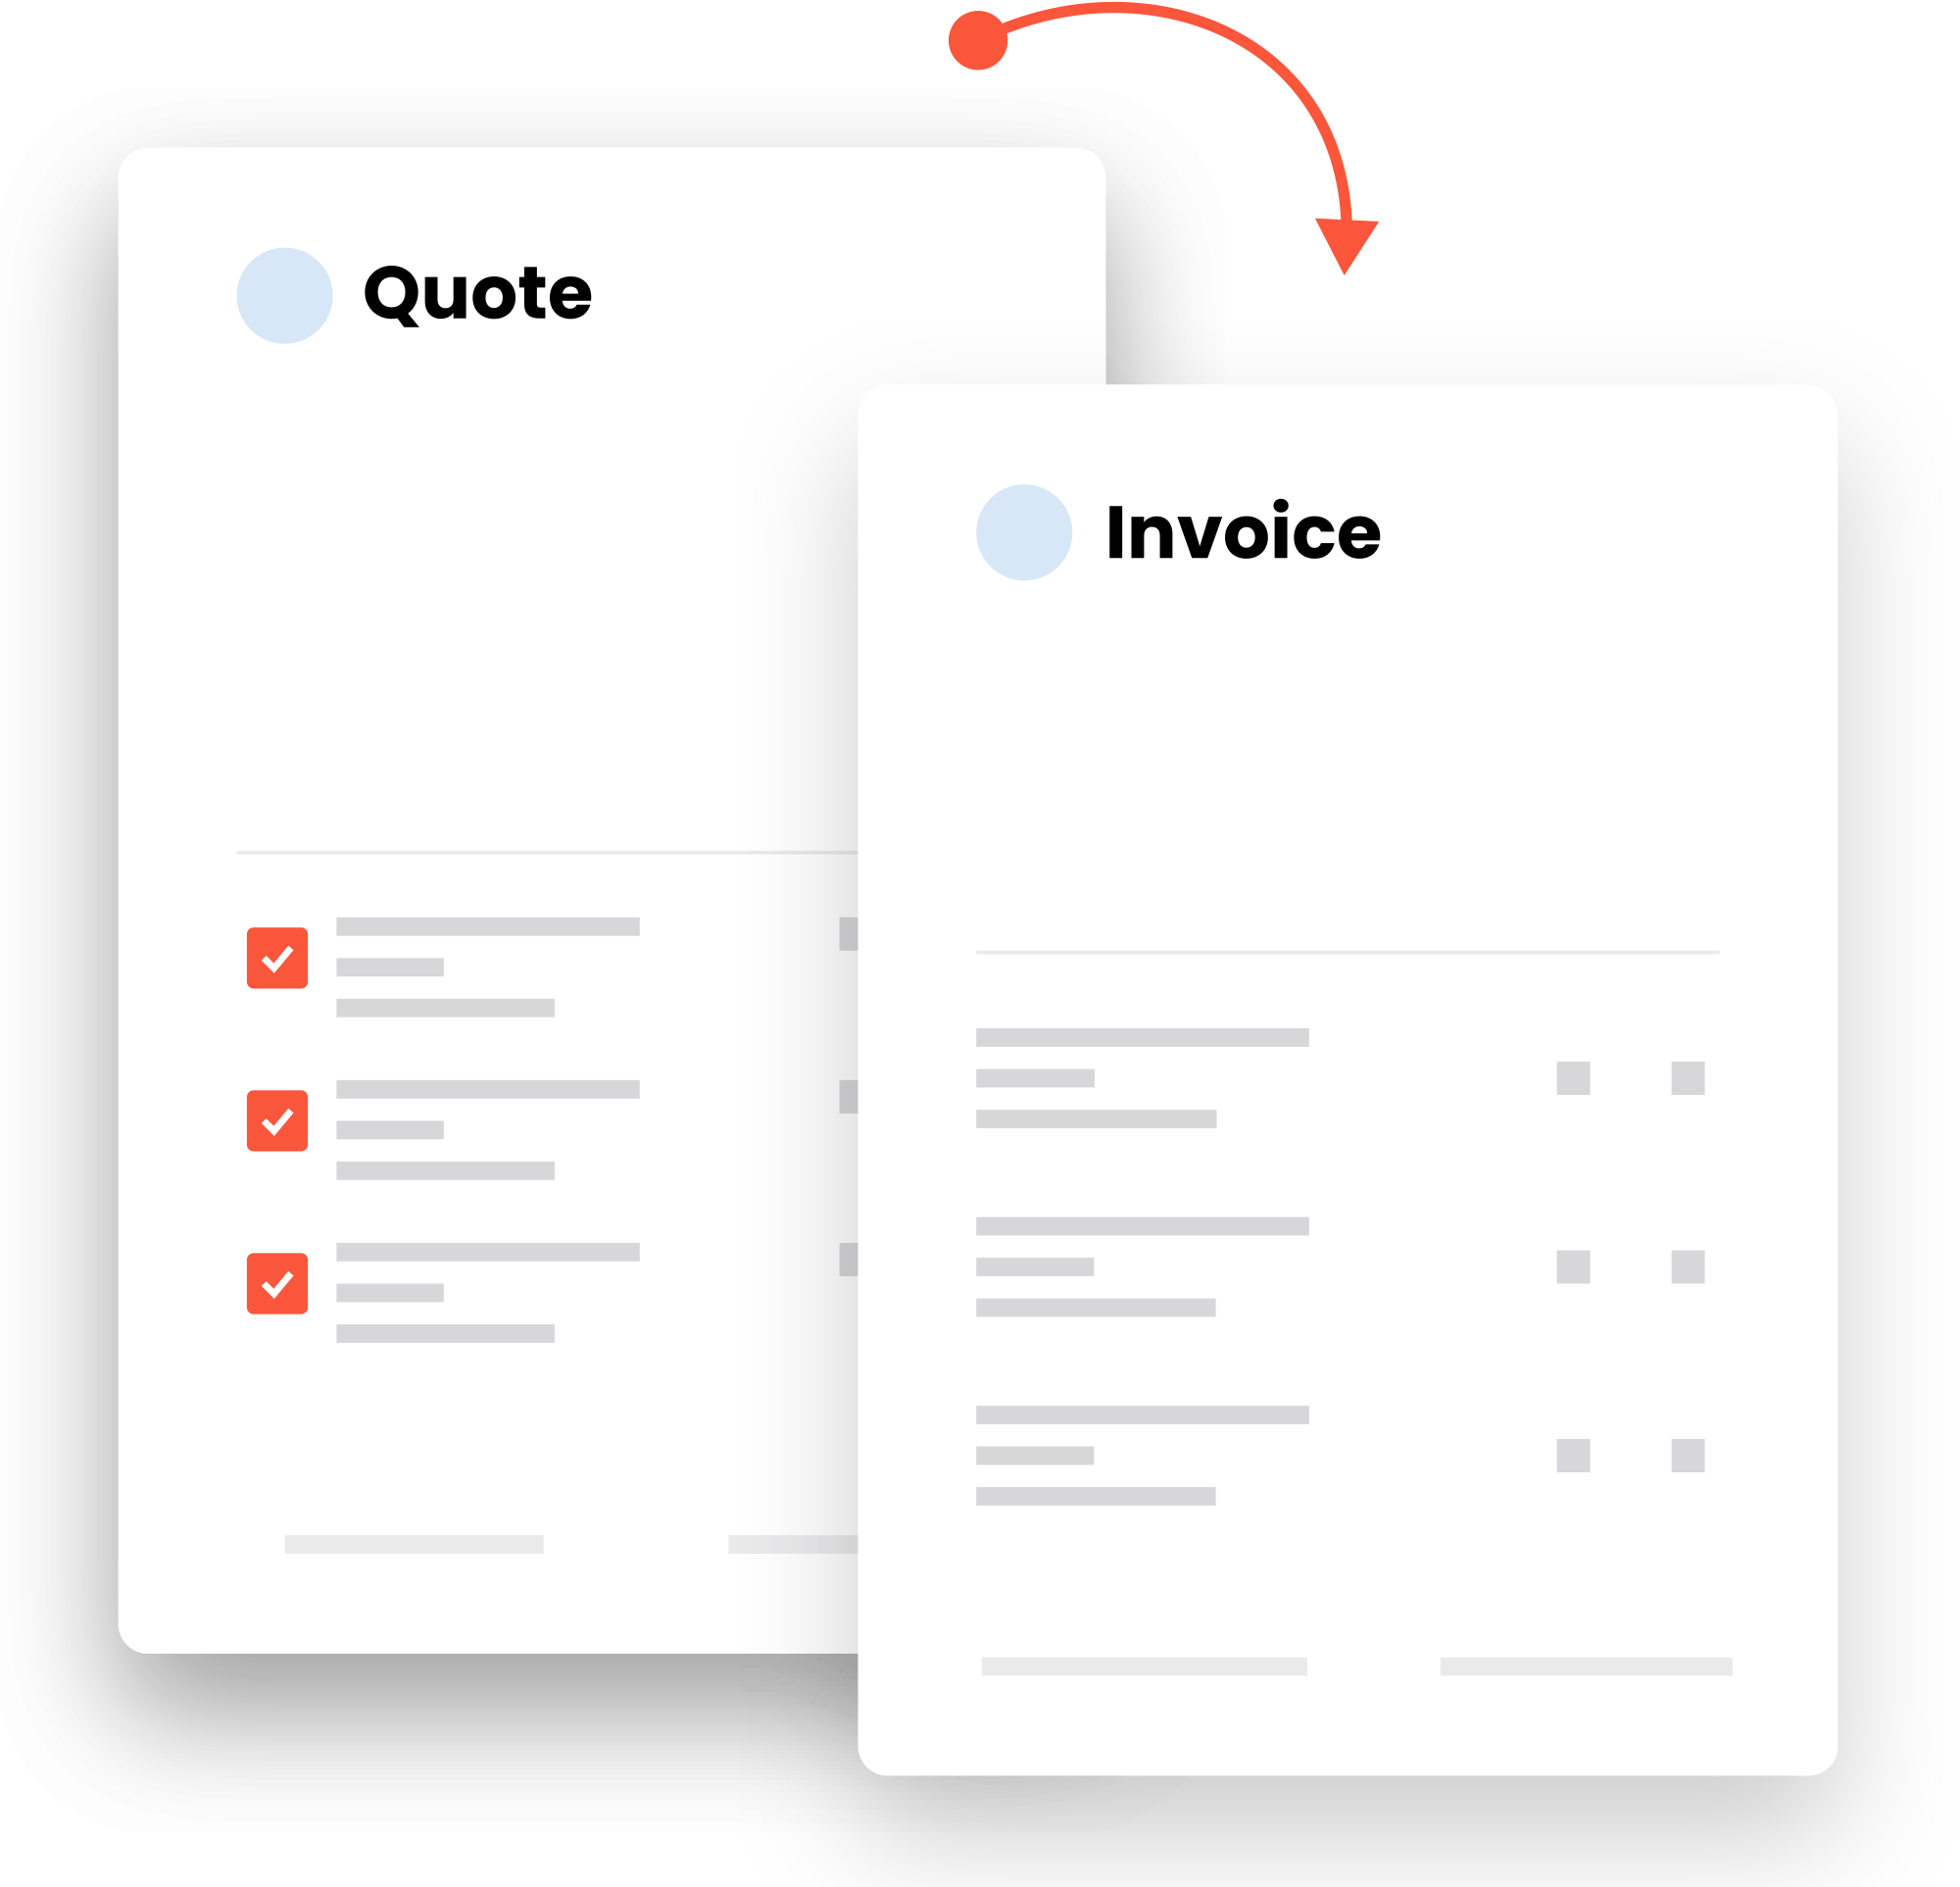 Turn your quotes into invoices at the click of a button